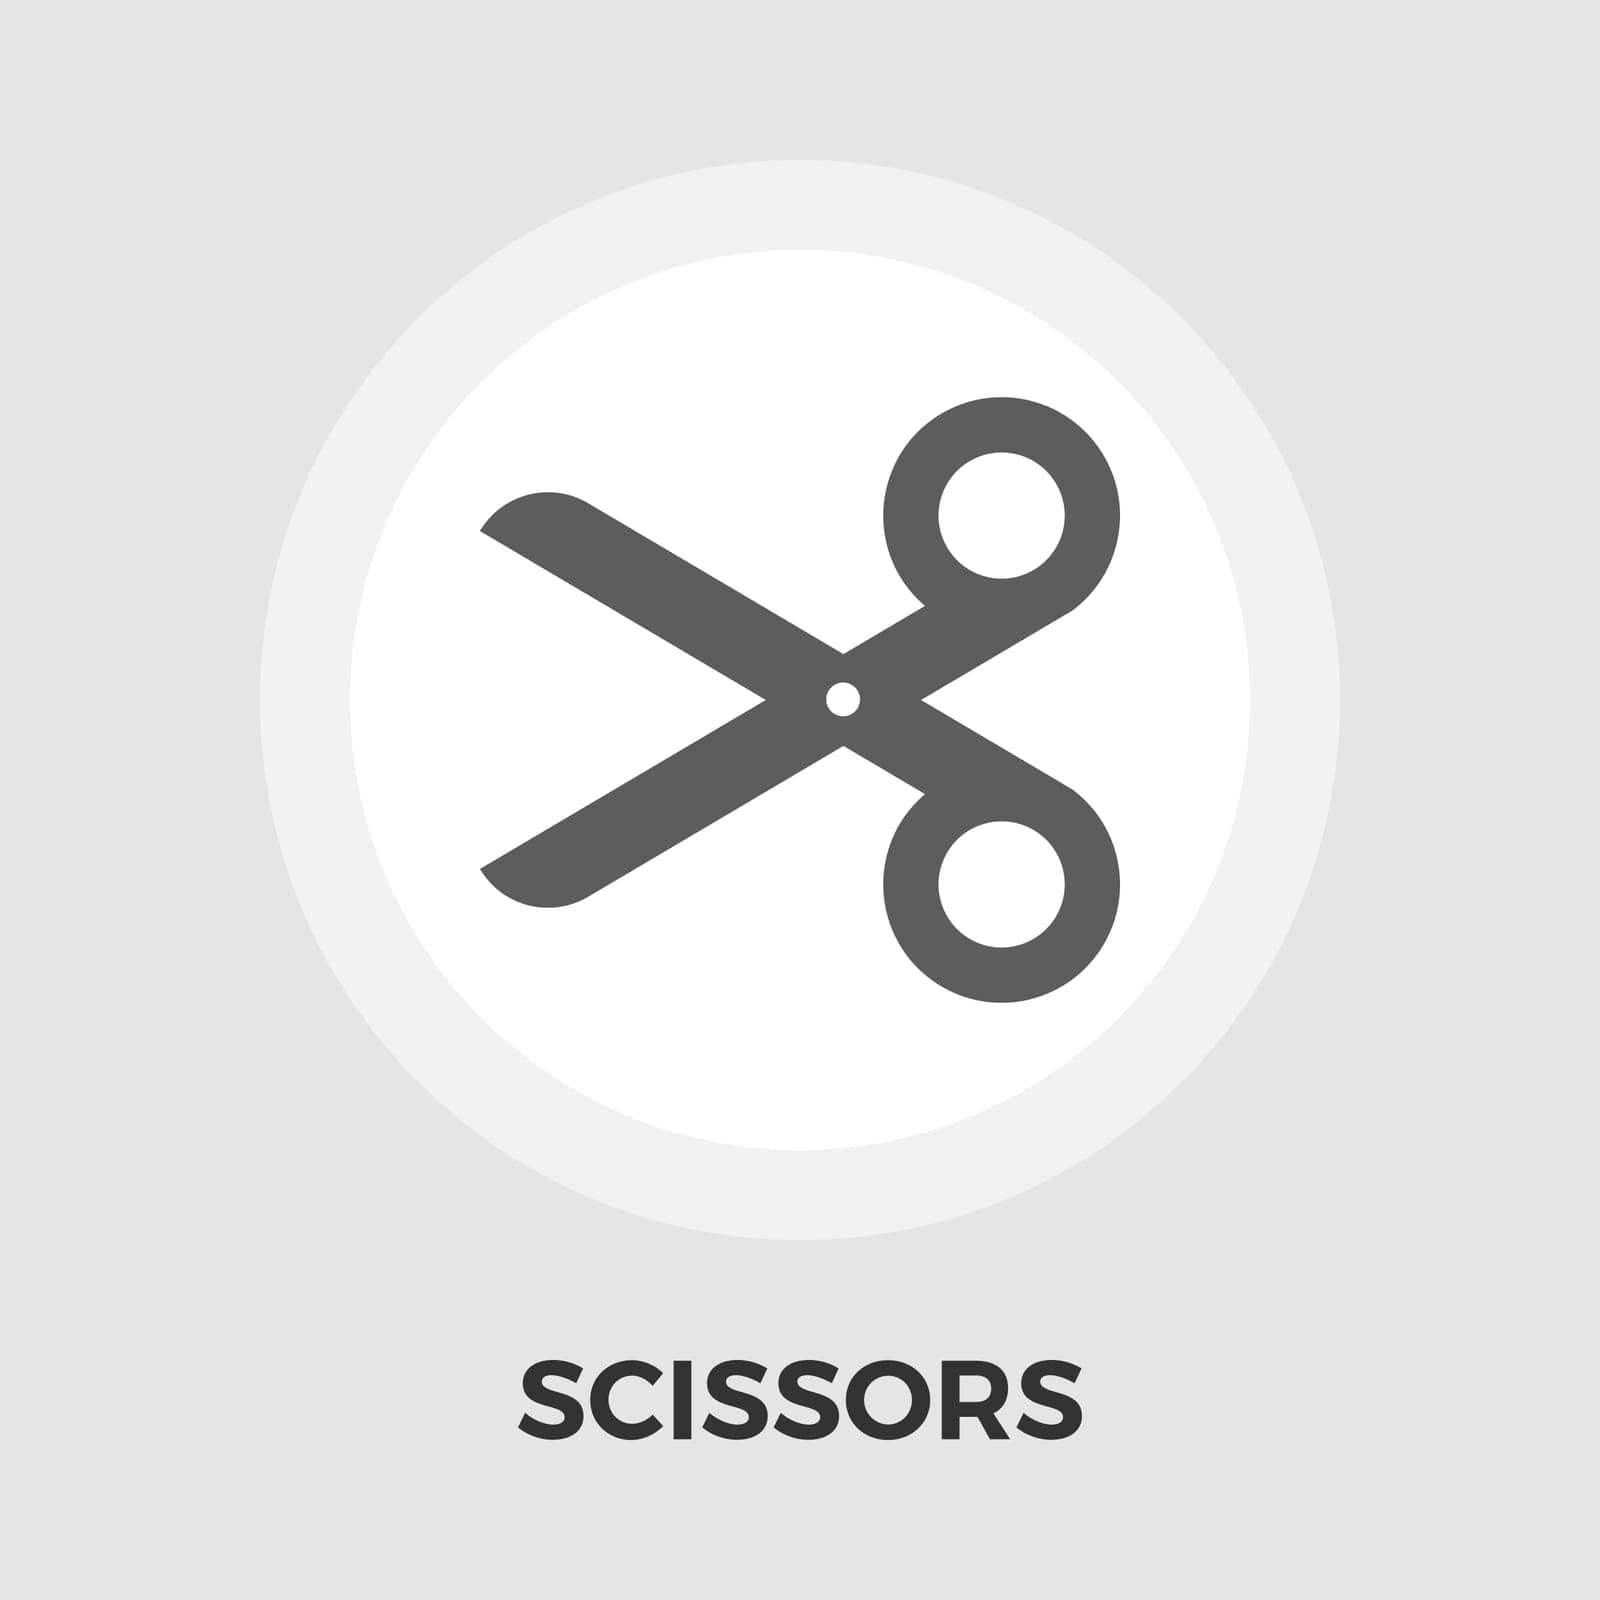 Scissors icon vector. Flat icon isolated on the white background. Editable EPS file. Vector illustration.